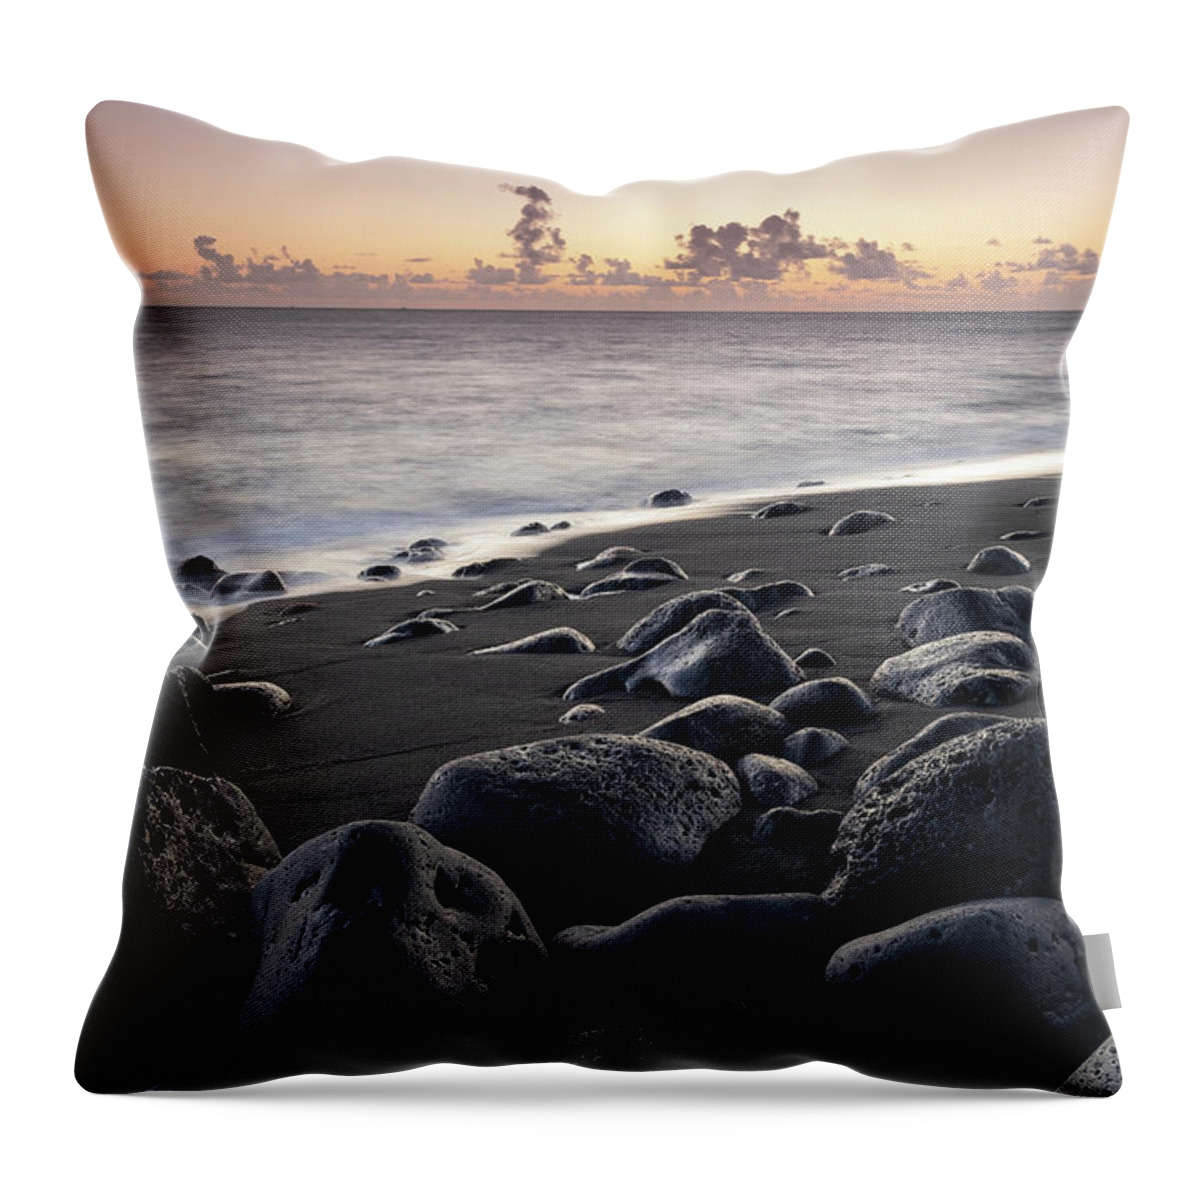 Ip_71316017 Throw Pillow featuring the photograph View Of The Sunset On The Black Beach In The Fishing Village Of La Bombilla, La Palma, Canary Islands, Spain, Europe #2 by Sonia Aumiller